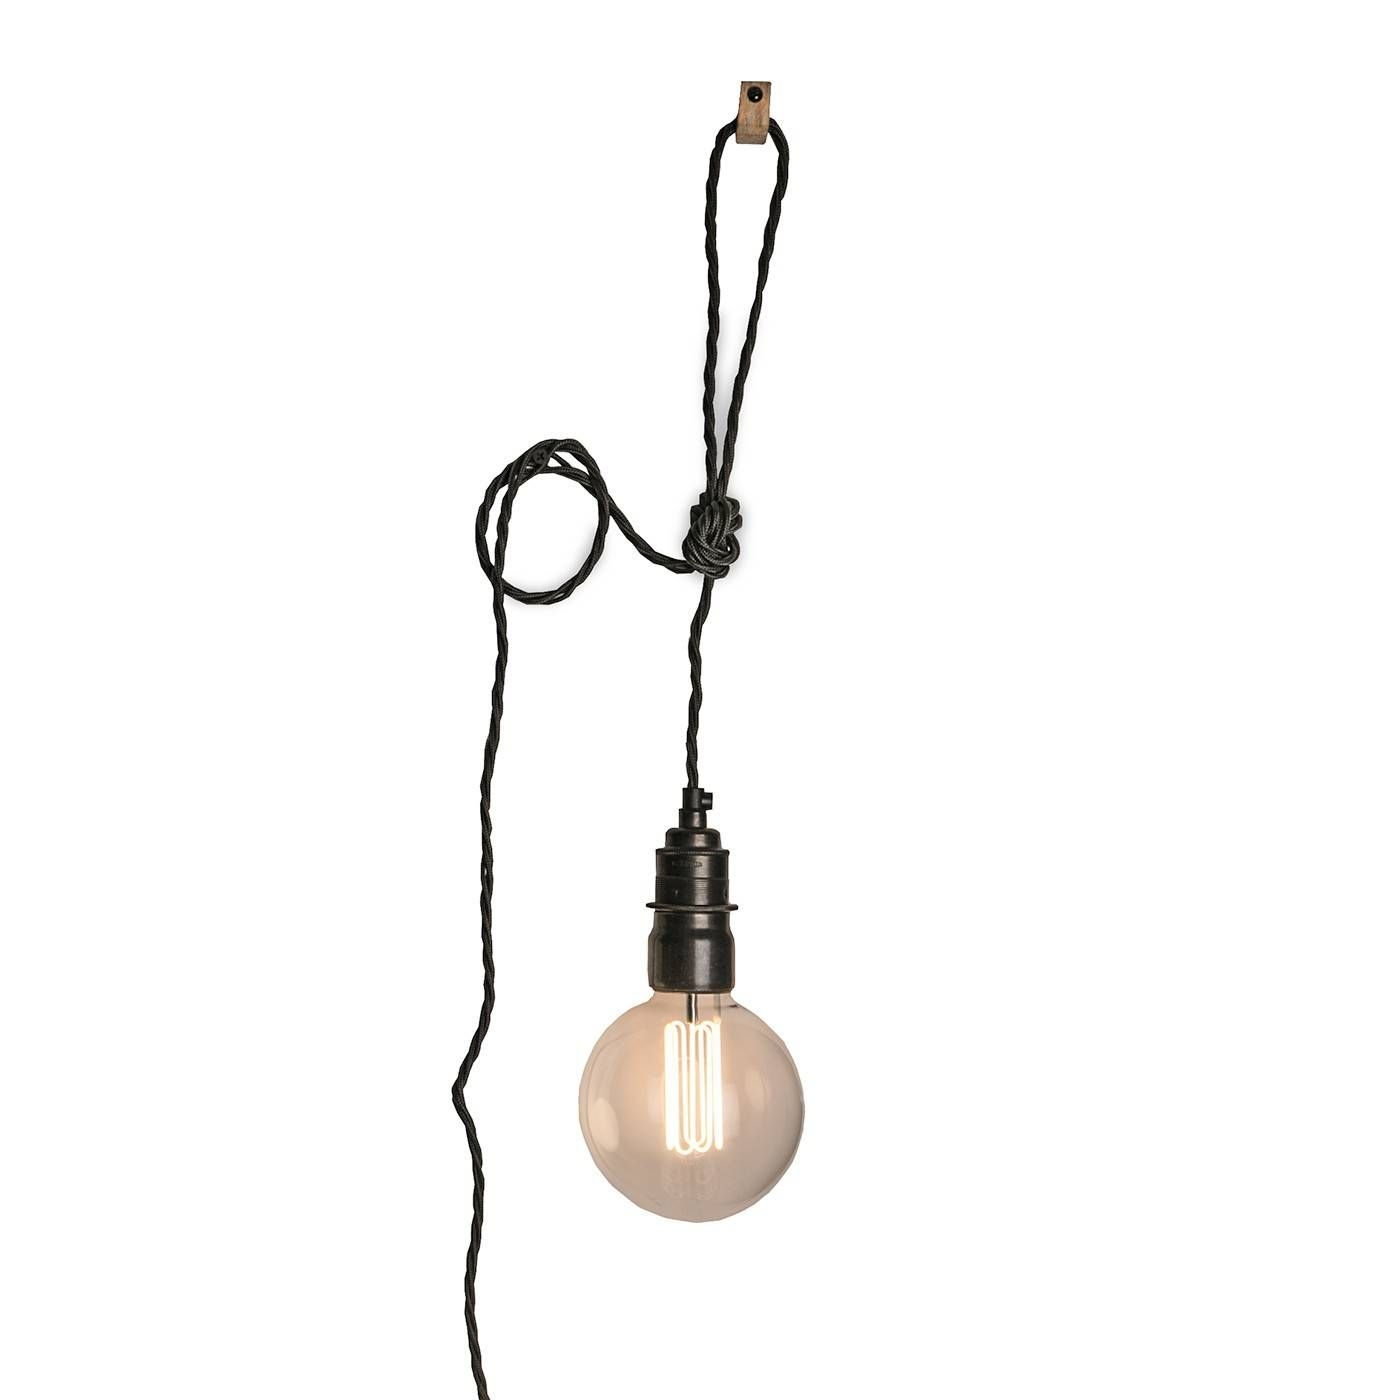 Heal's Plug In Hanging Pendant With Plug In Hanging Pendant Lights (View 15 of 15)